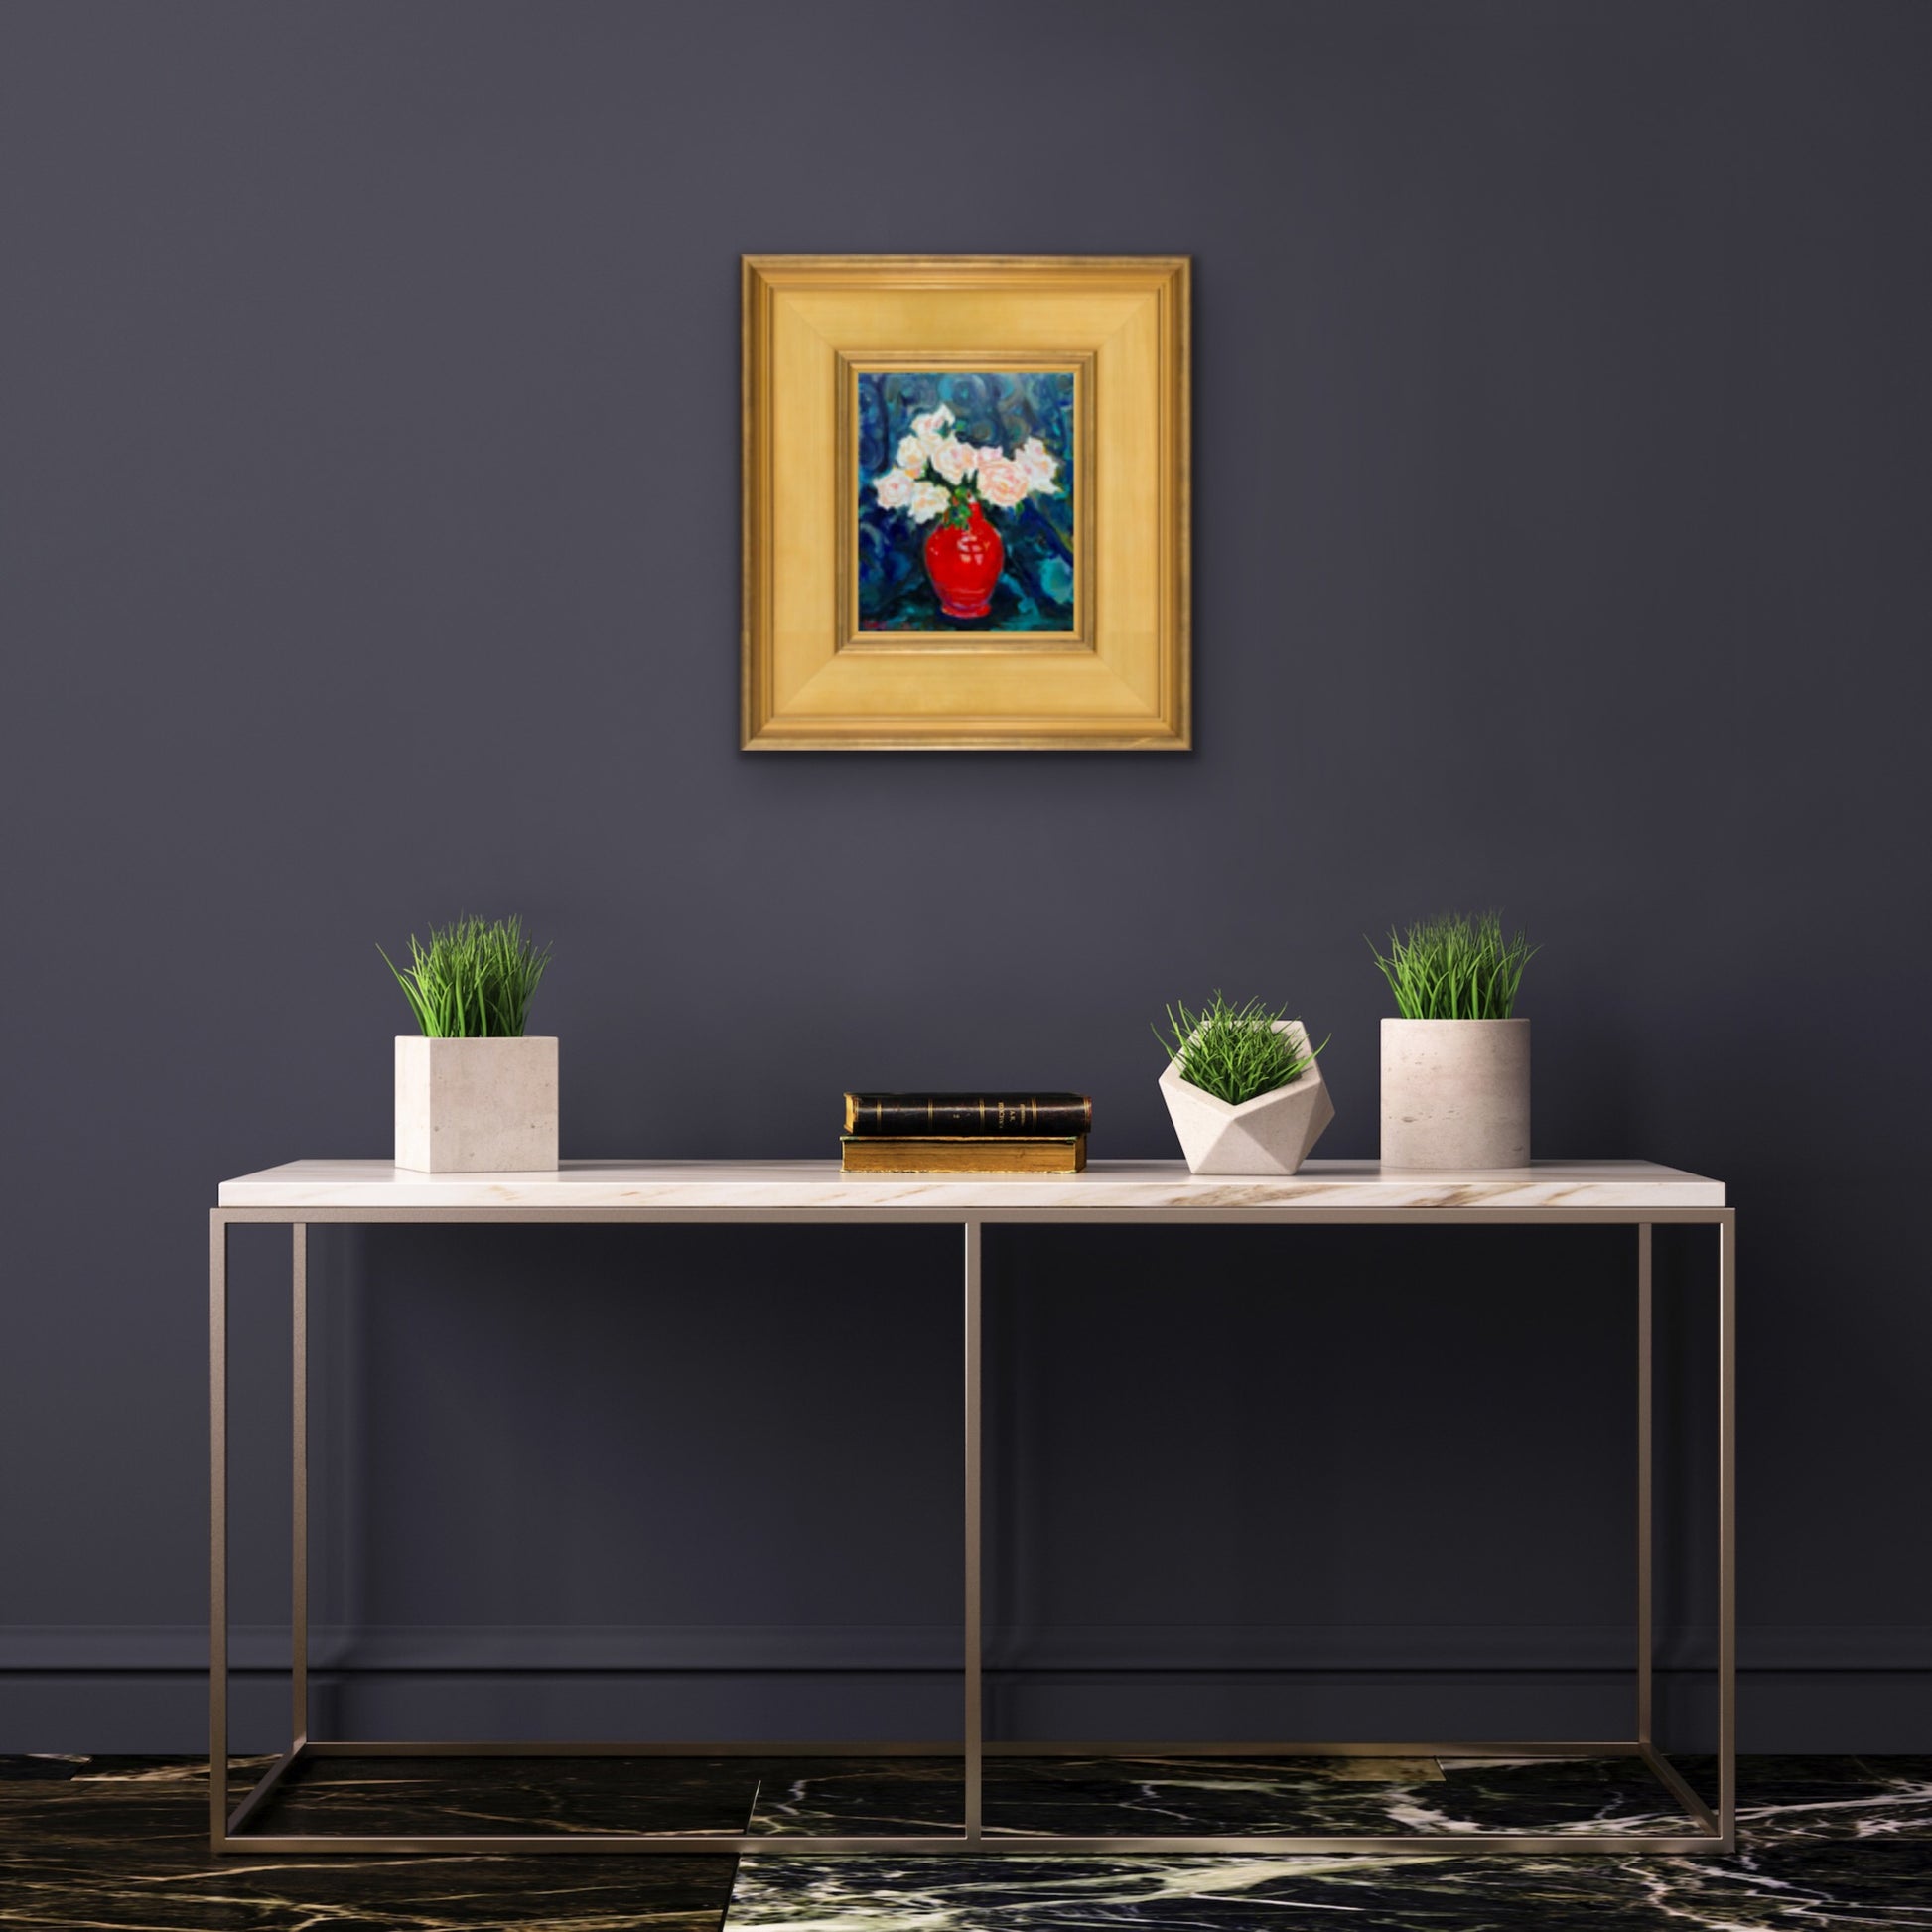 Fine art painting of Blush Roses in a Red Vintage Vase. Displayed against a grey wall with white table in front.